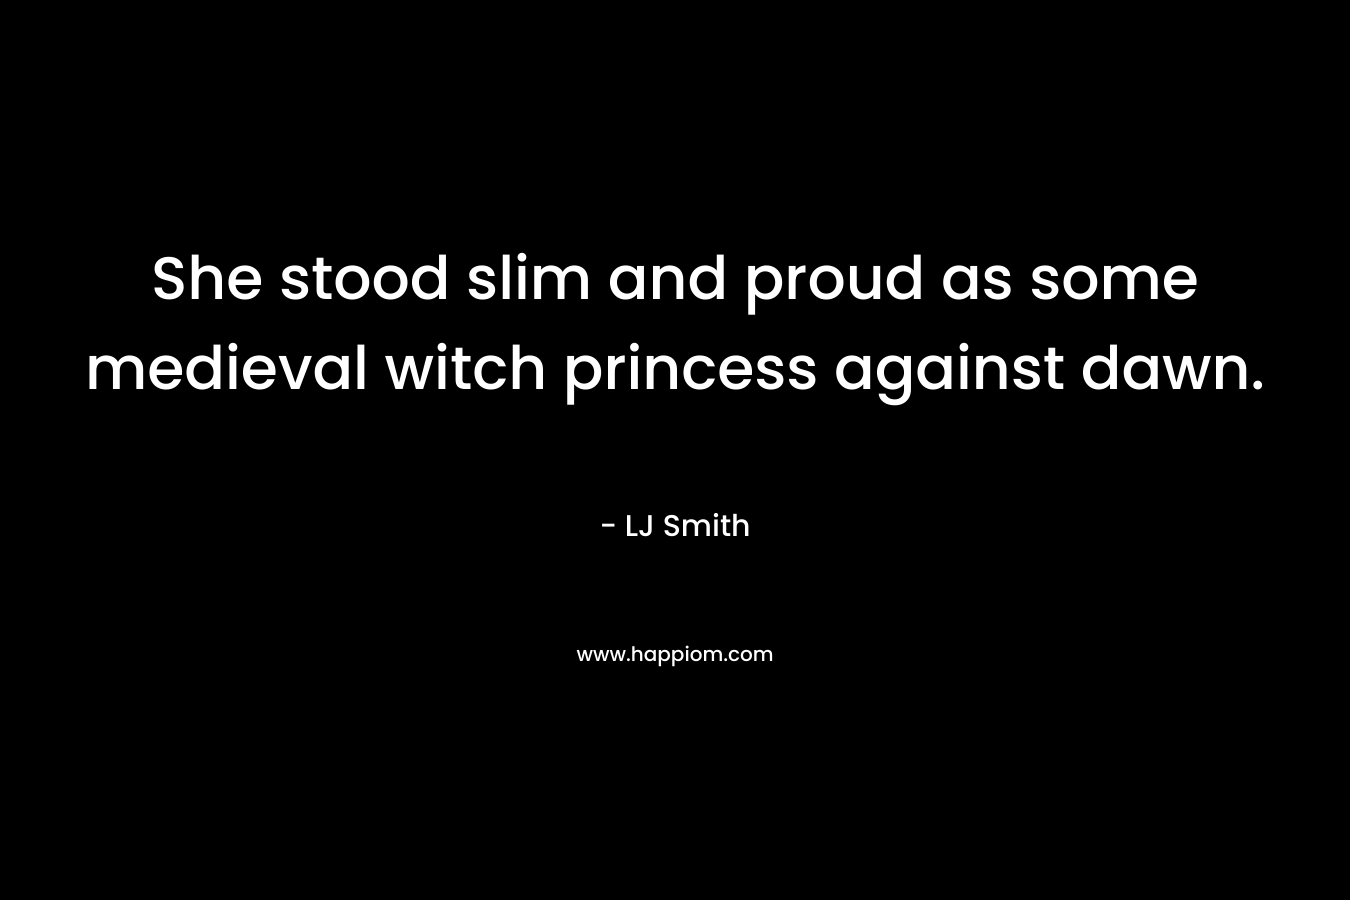 She stood slim and proud as some medieval witch princess against dawn.